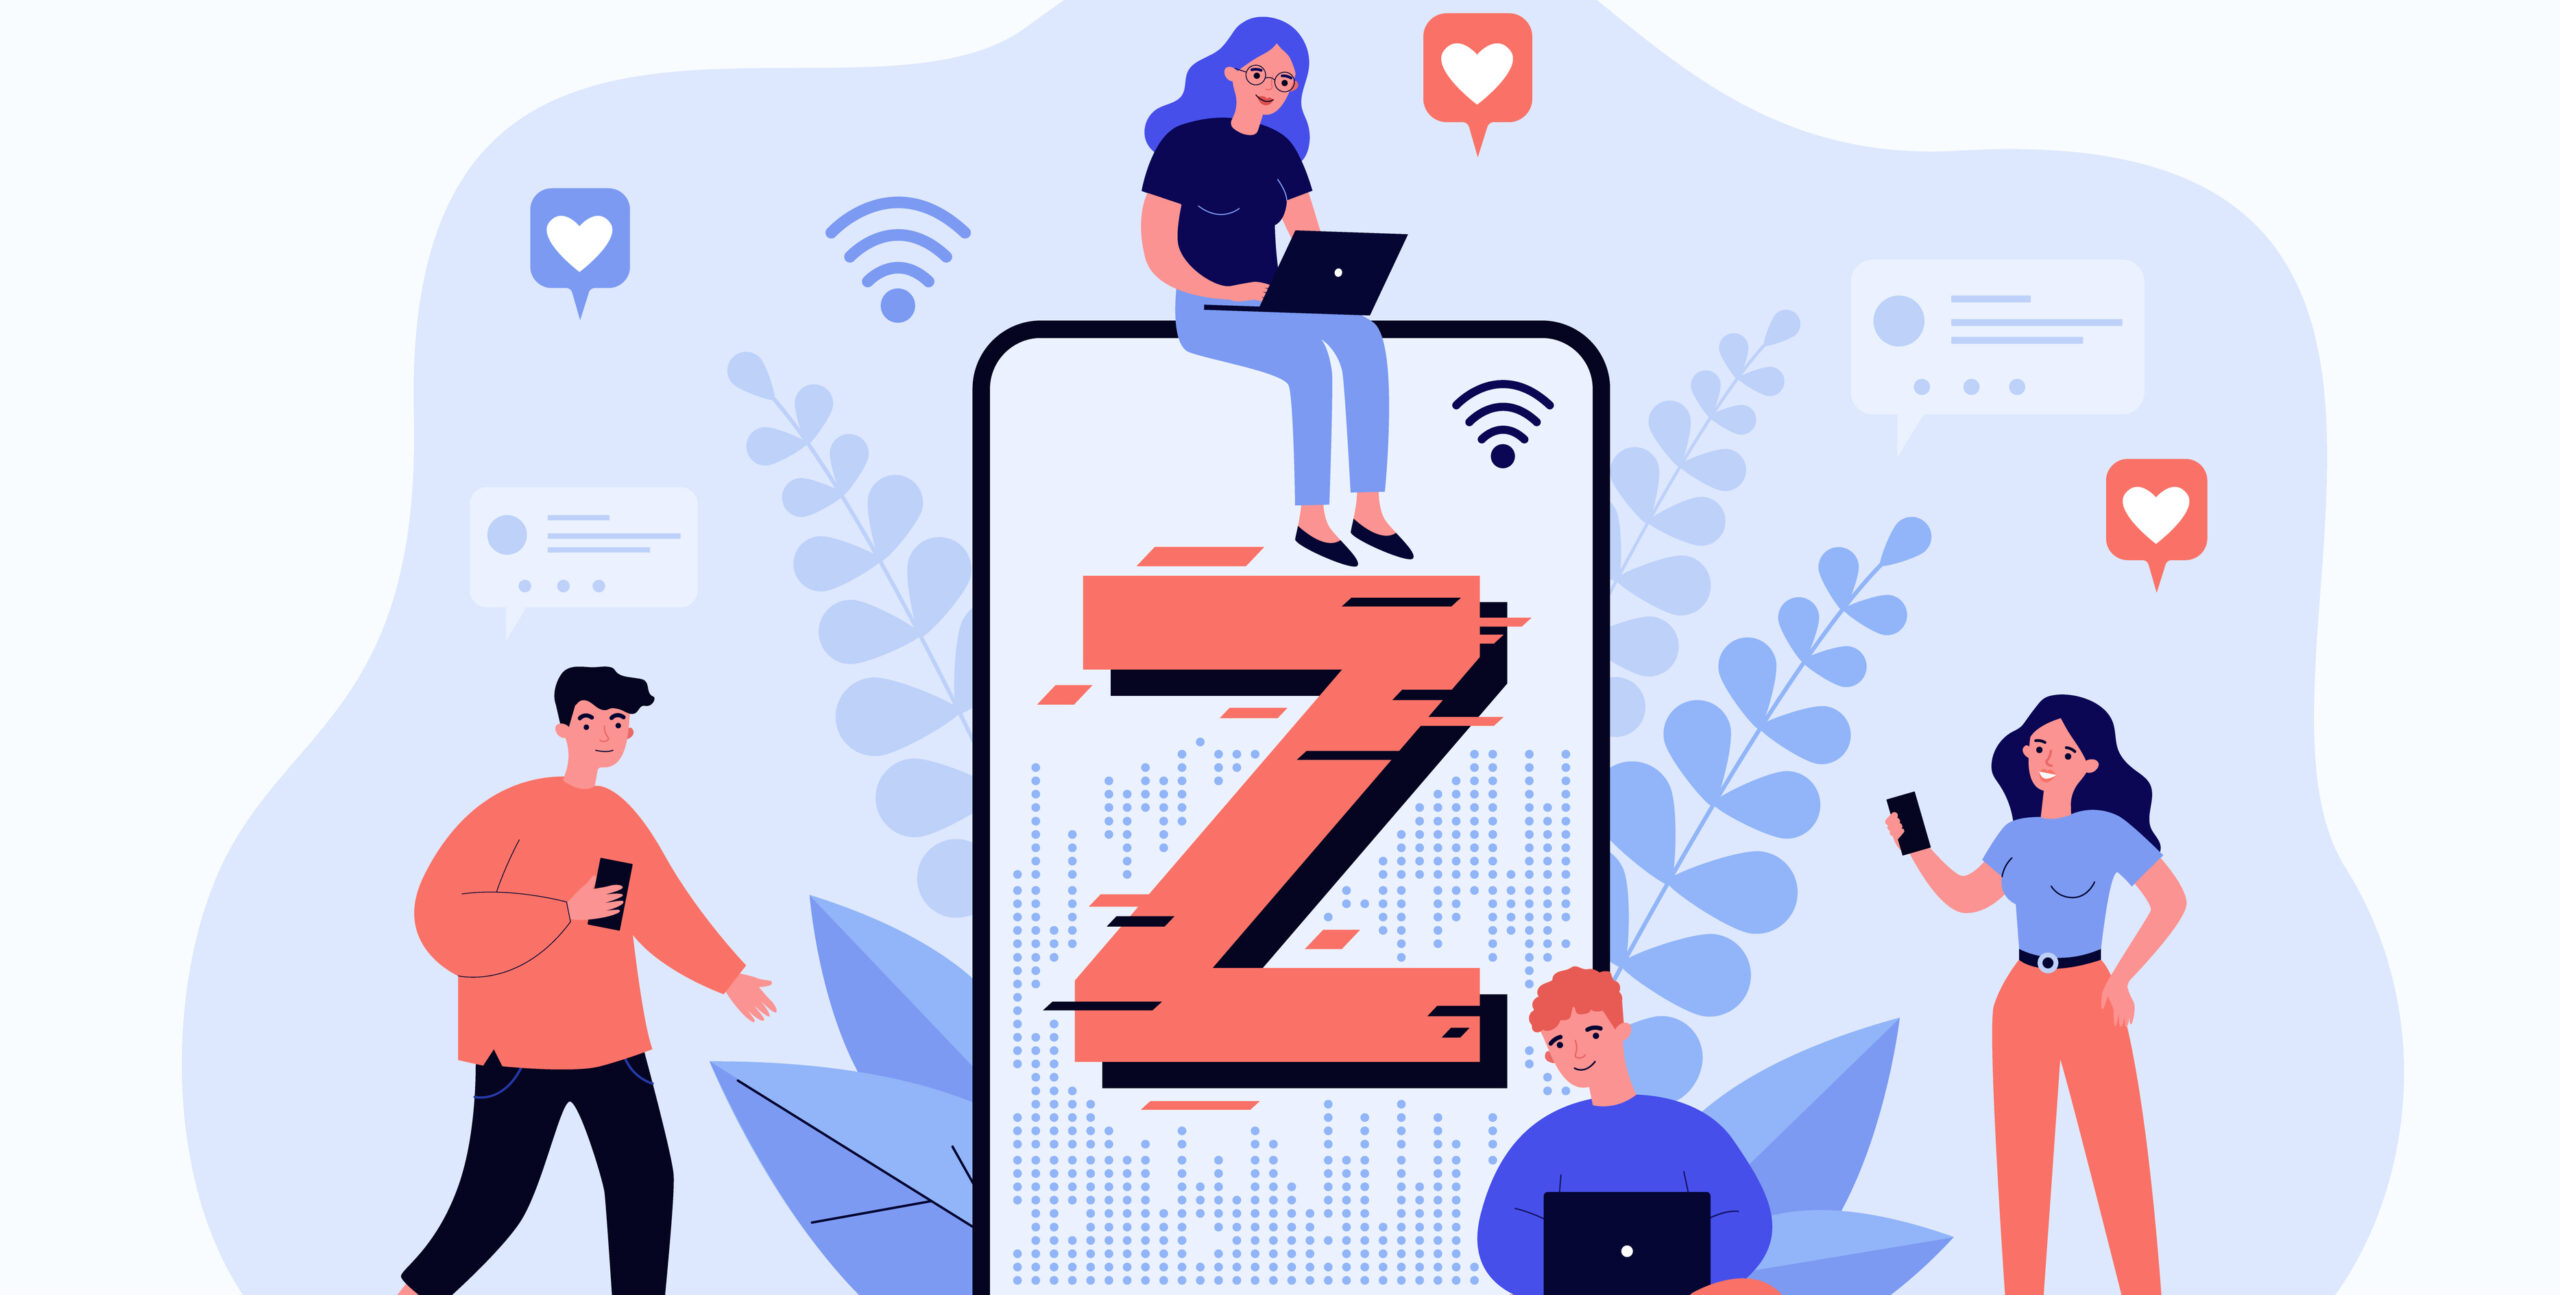 Marketing to Gen Z: 6 Strategies for Email